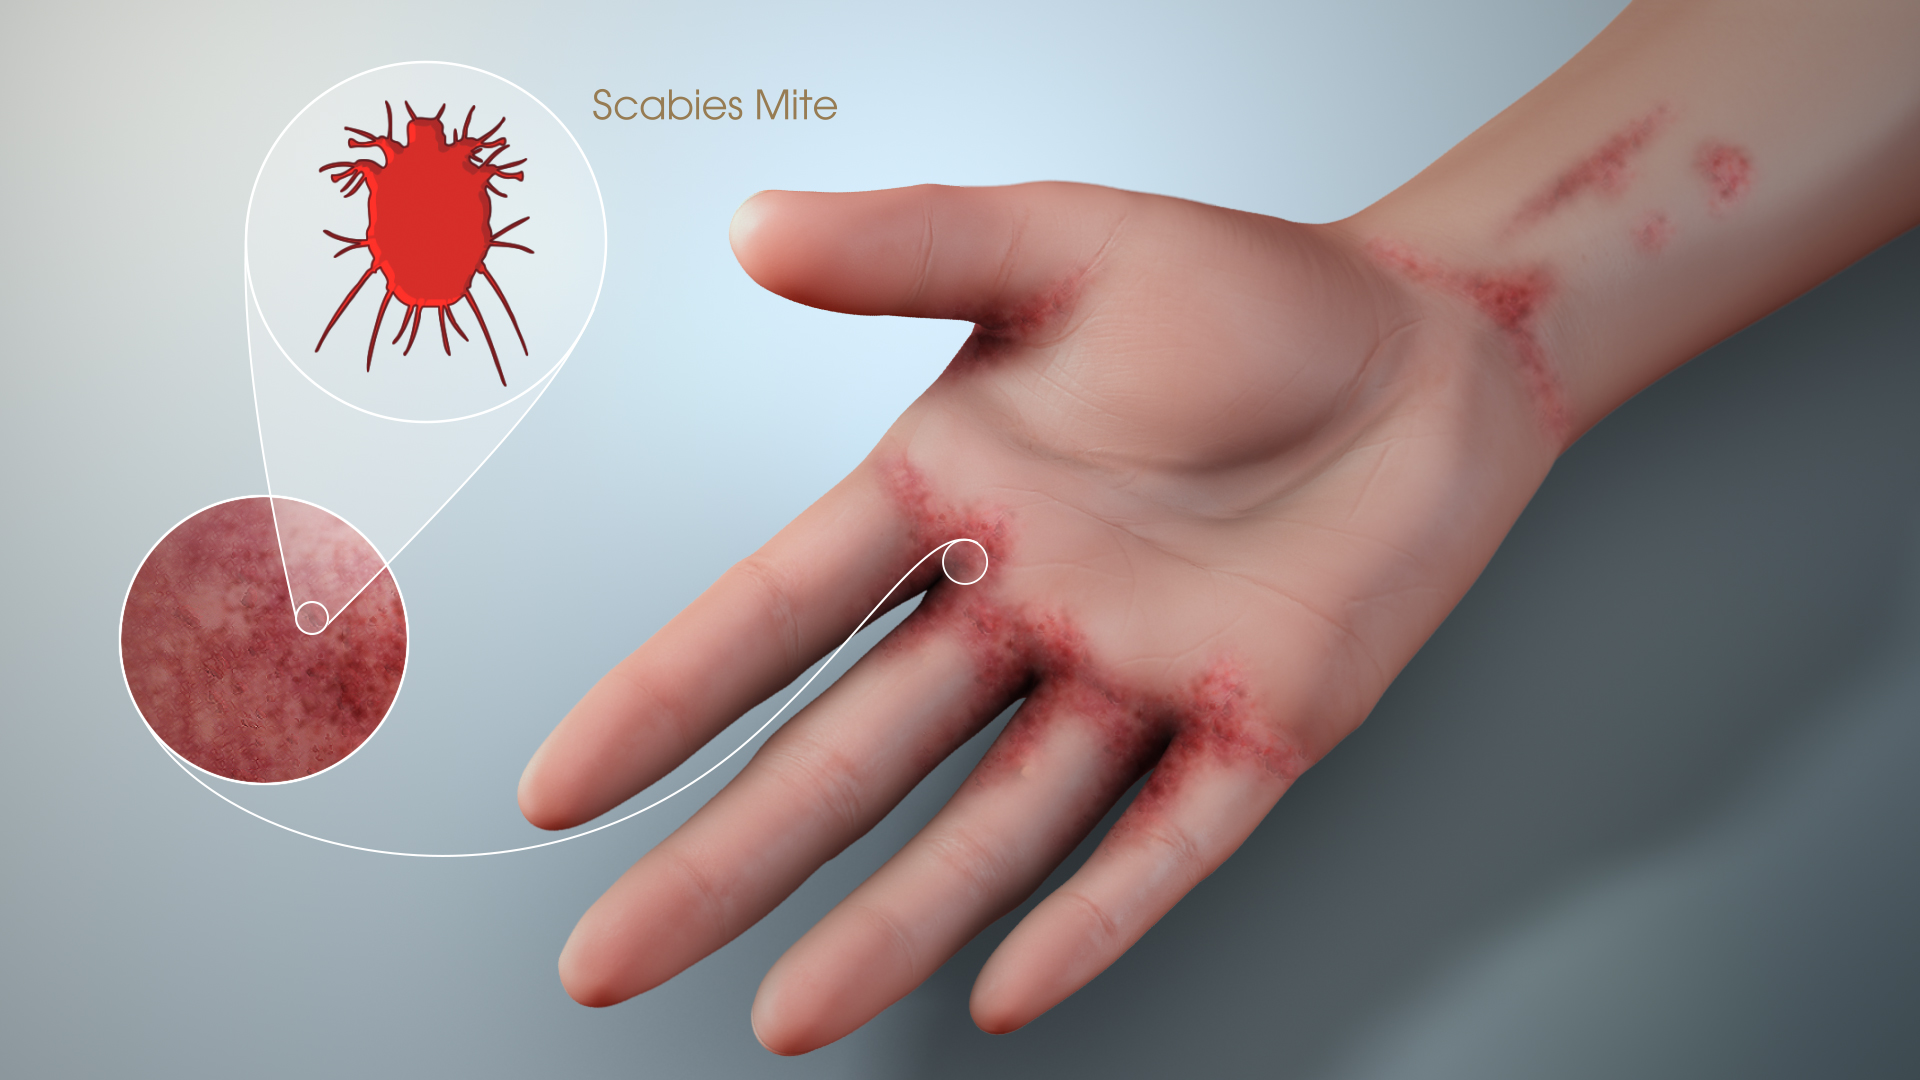 Scabies: Symptoms, Causes, and Treatment - Scientific Animations